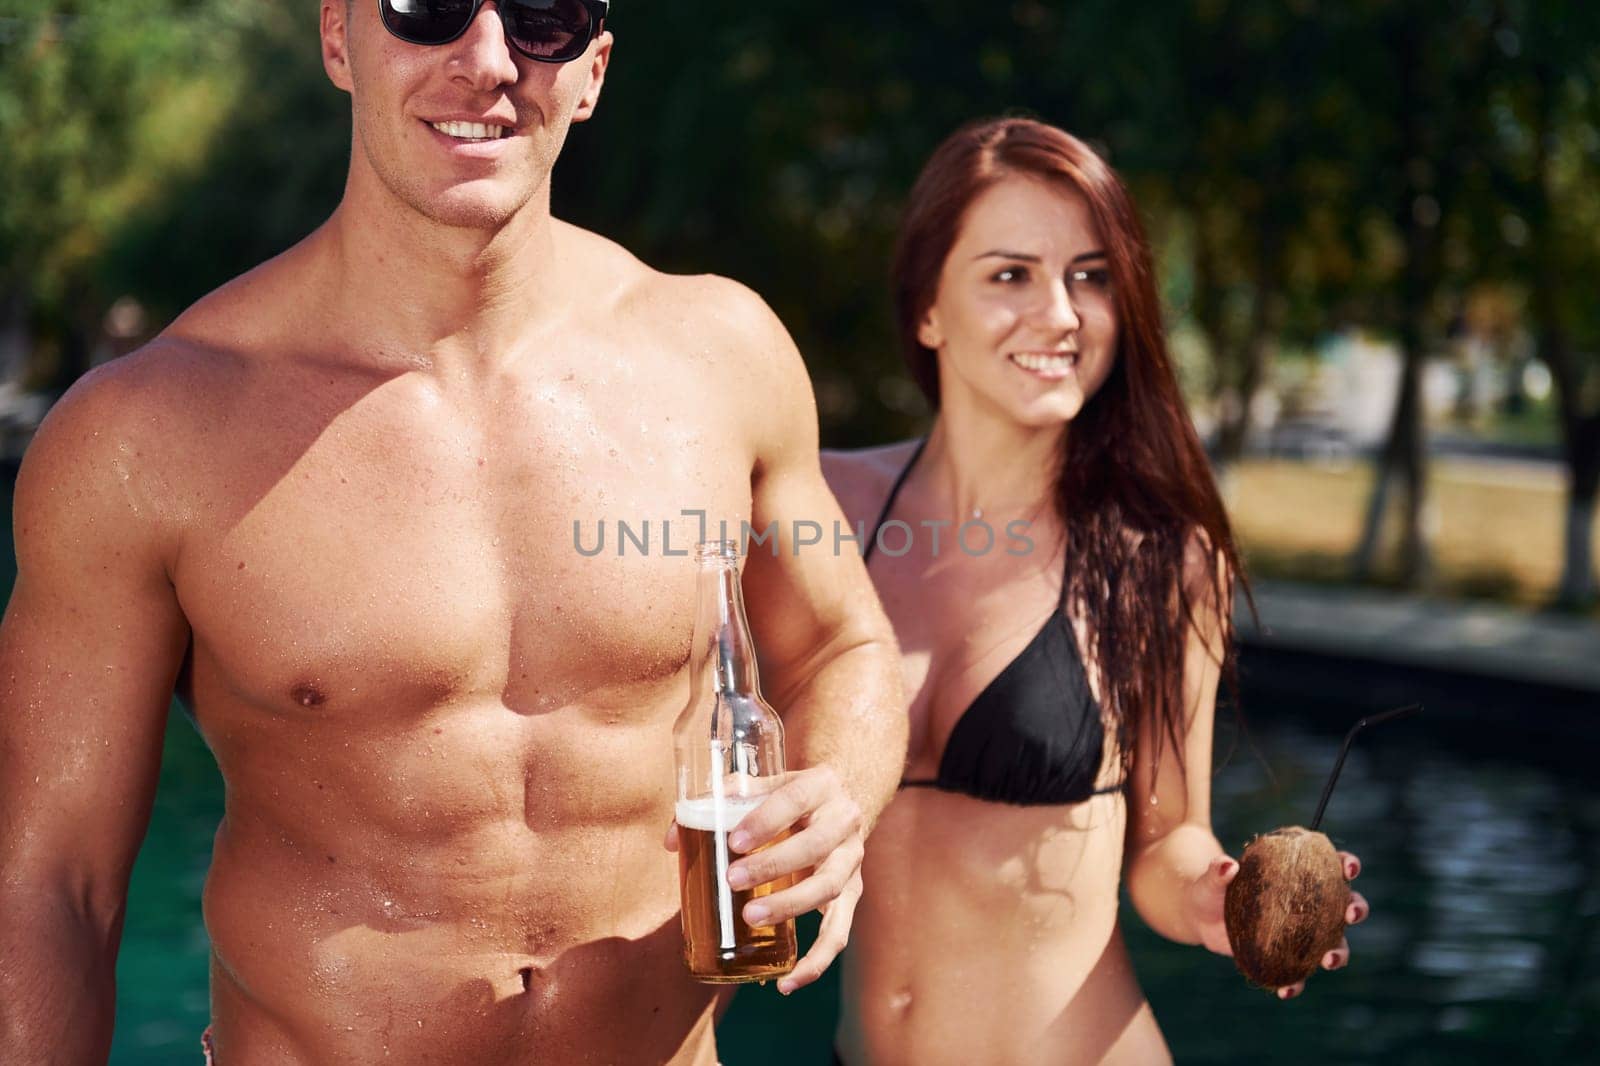 Positive people. Cheerful couple or friends together in swimming pool at vacation.